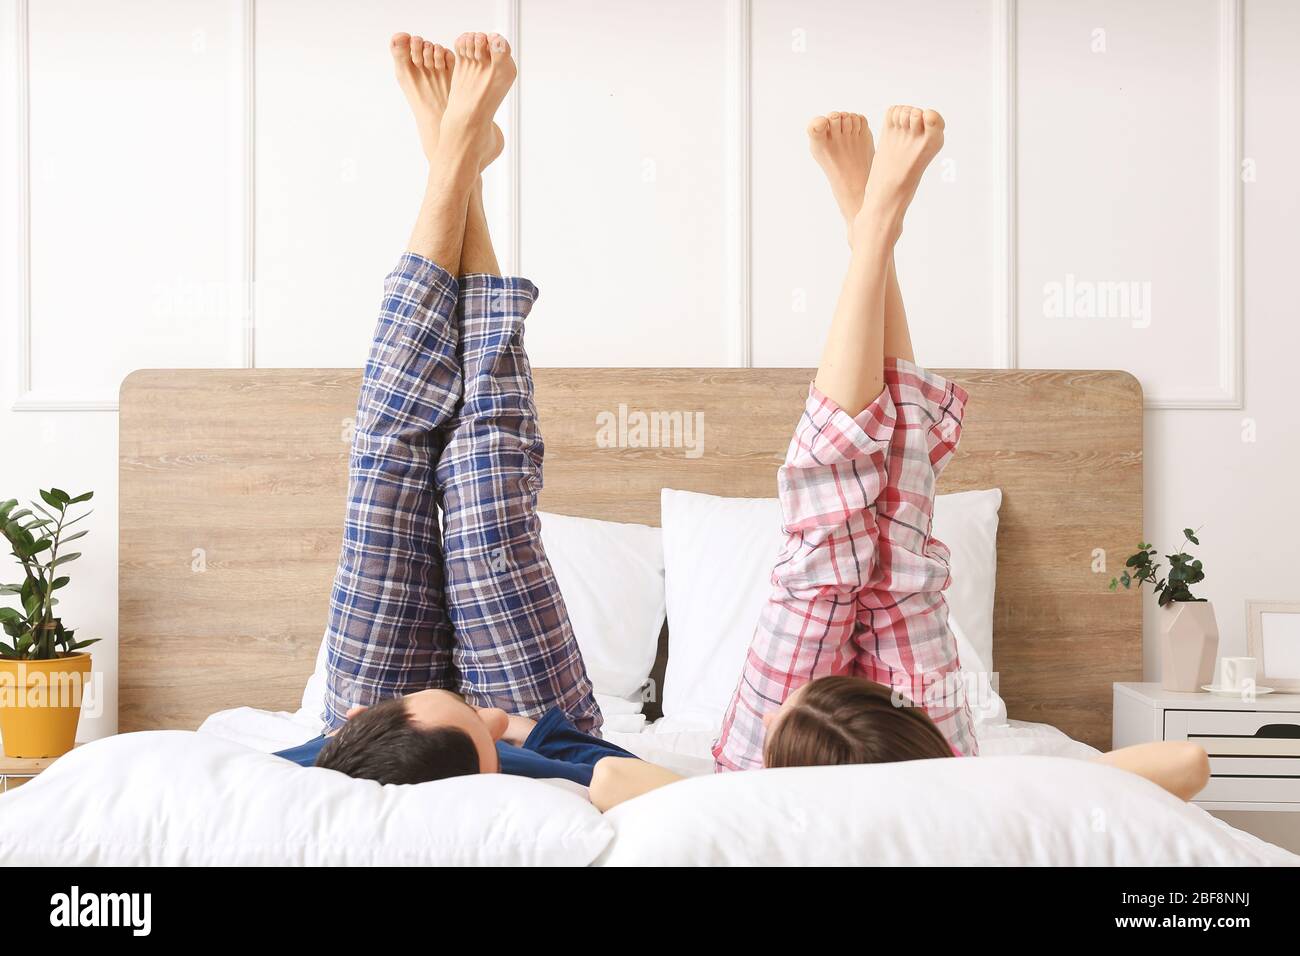 https://c8.alamy.com/comp/2BF8NNJ/young-couple-lying-in-bed-at-home-2BF8NNJ.jpg